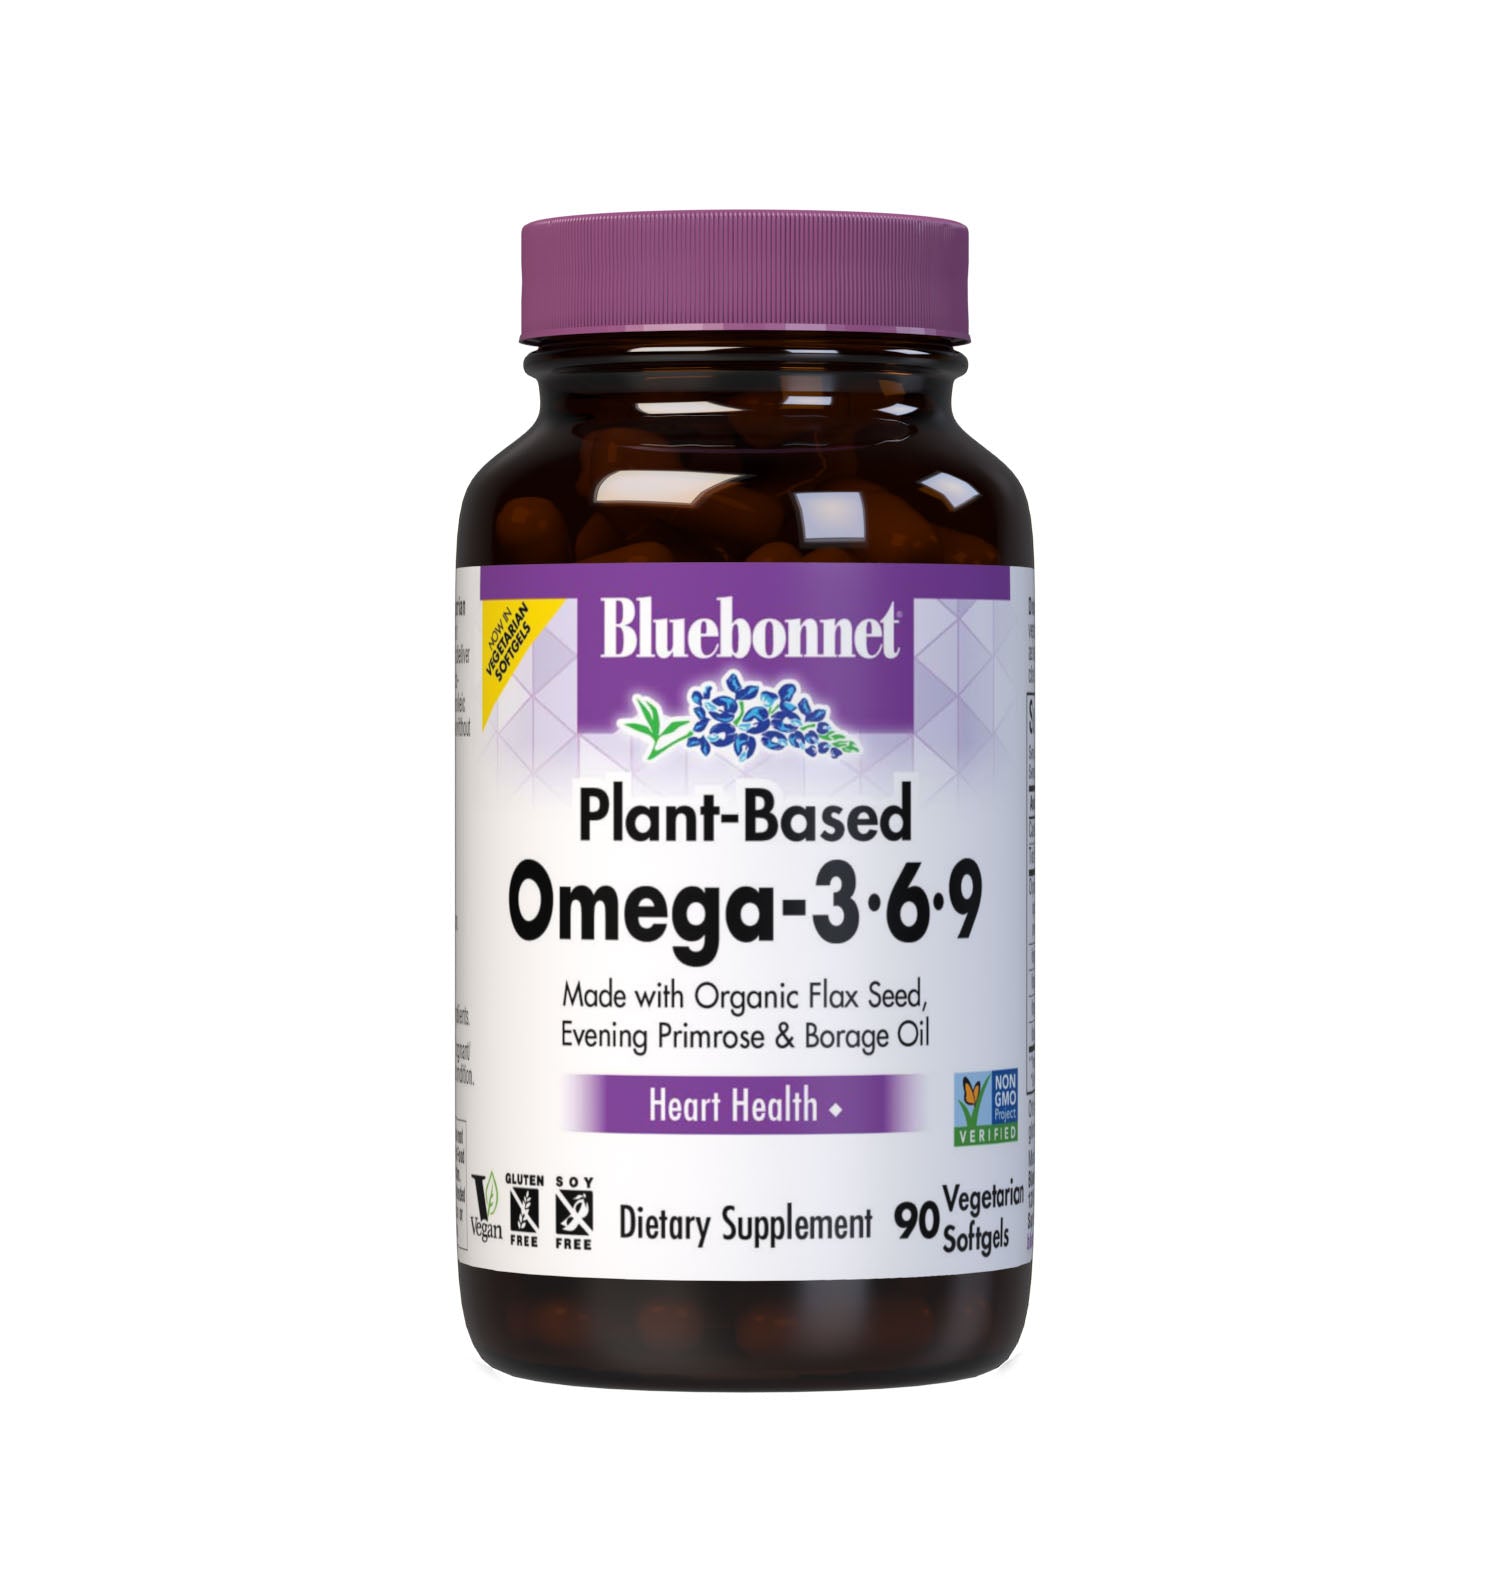 Bluebonnet’s Plant-Based Omega-3•6•9 1000 mg Vegetarian Softgels offer healthy essential mono- and polyunsaturated fatty acids from flaxseed, evening primrose and borage oils, which have the popular alpha- and gamma-linolenic acids plus, oleic acid for cardiovascular support. #size_90 count